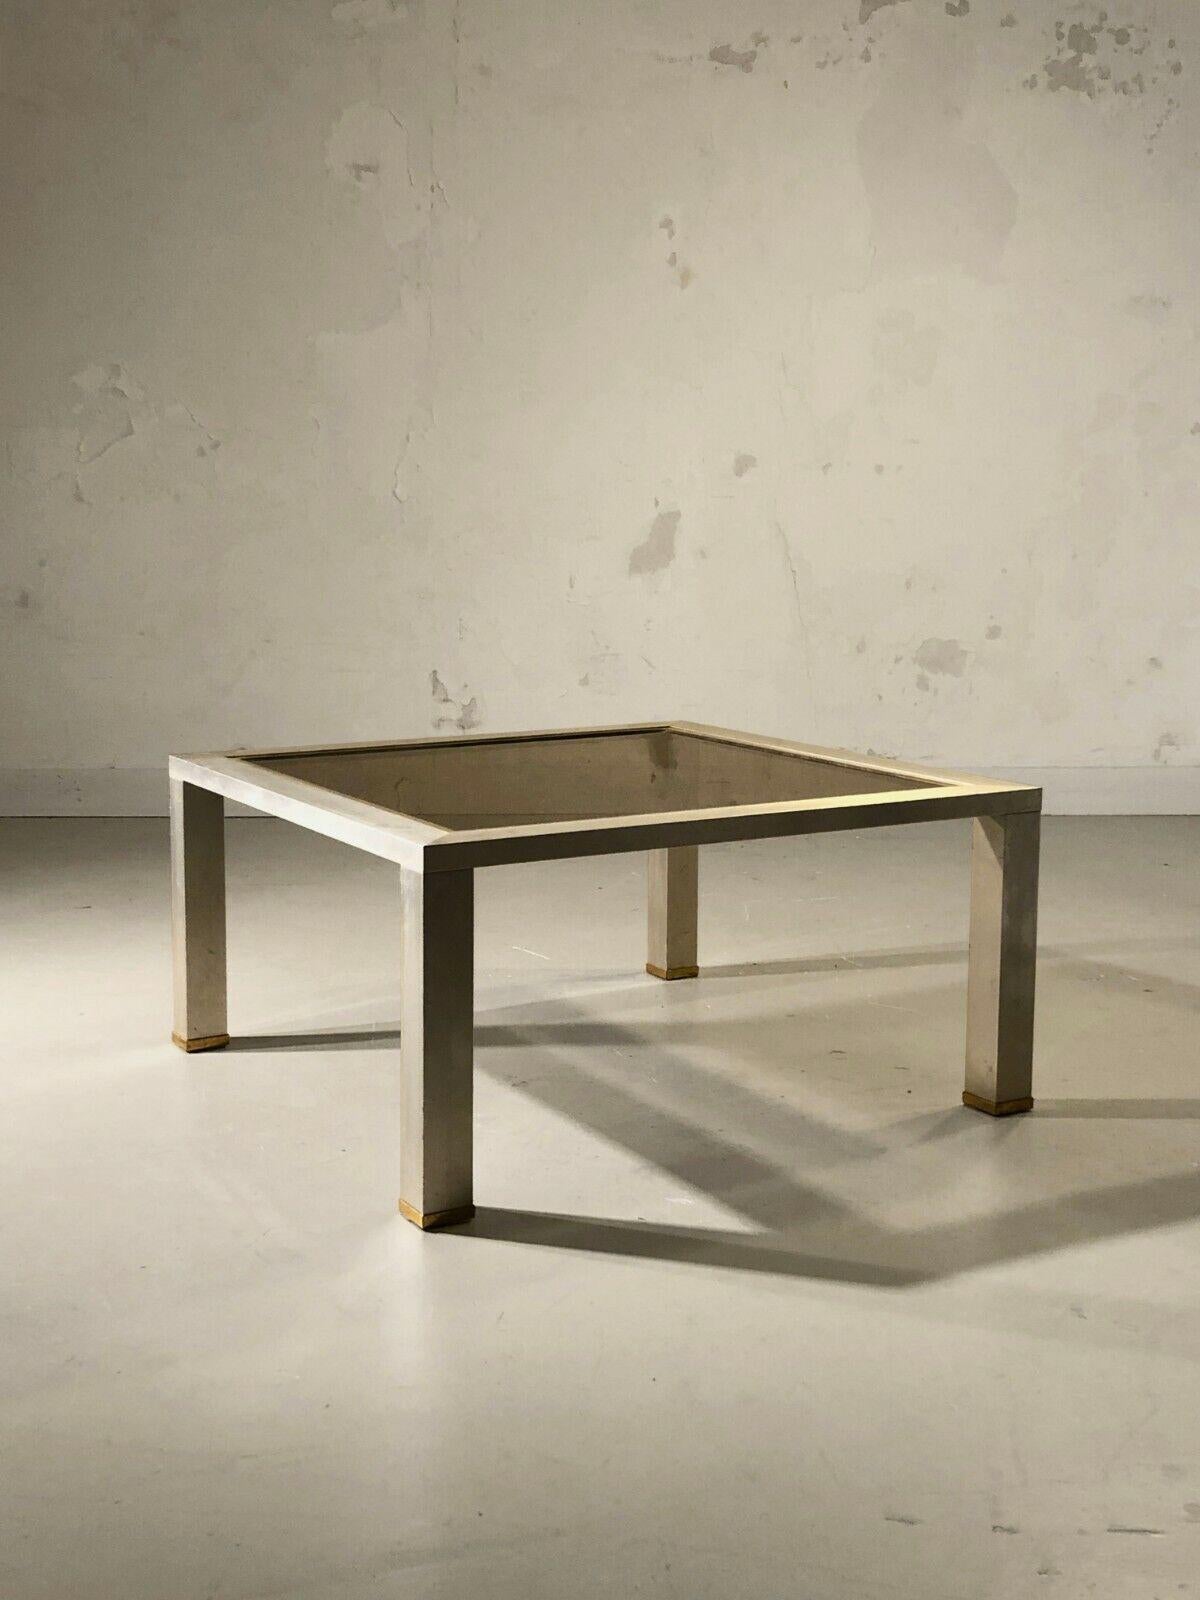 An elegant and rigorous square coffee table, Post-Modernist, Bauhaus, Shabby-Chic, Space-Age, structure in square section aluminum slats with a matt metal gray appearance with a light varnish , smoked glass top enhanced by a gilded brass frame,